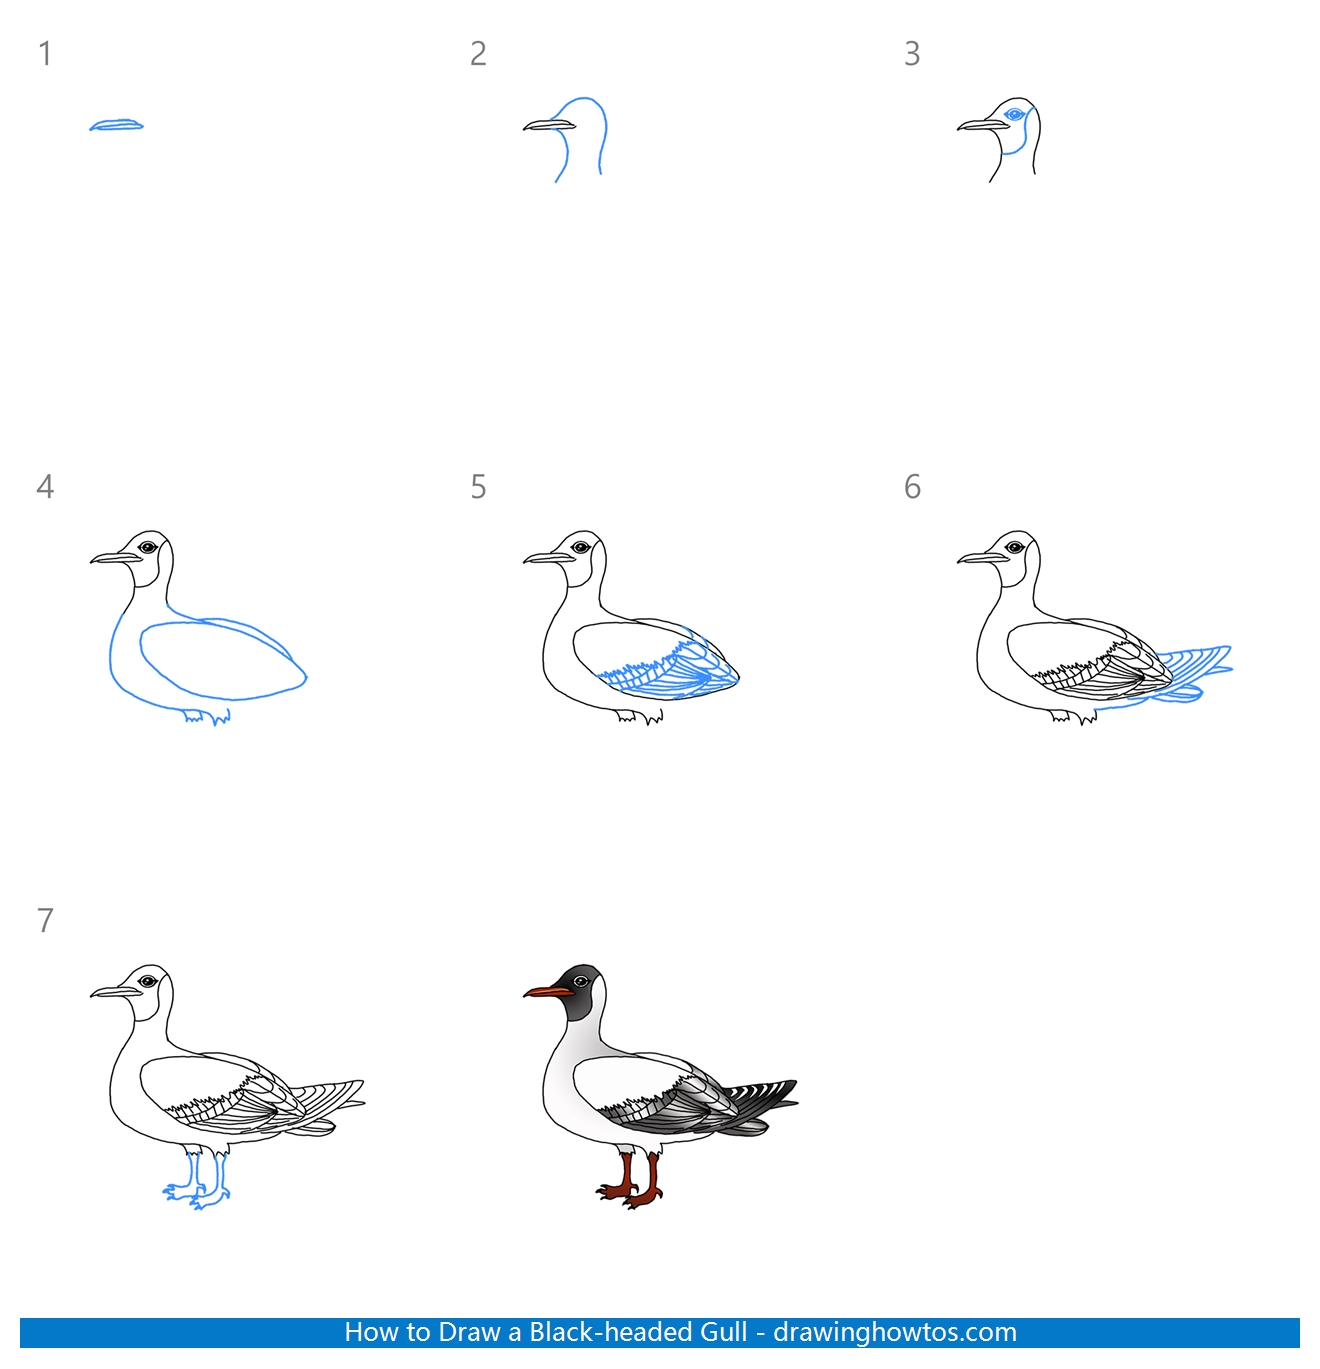 How to Draw a Black-Headed Gull Step by Step